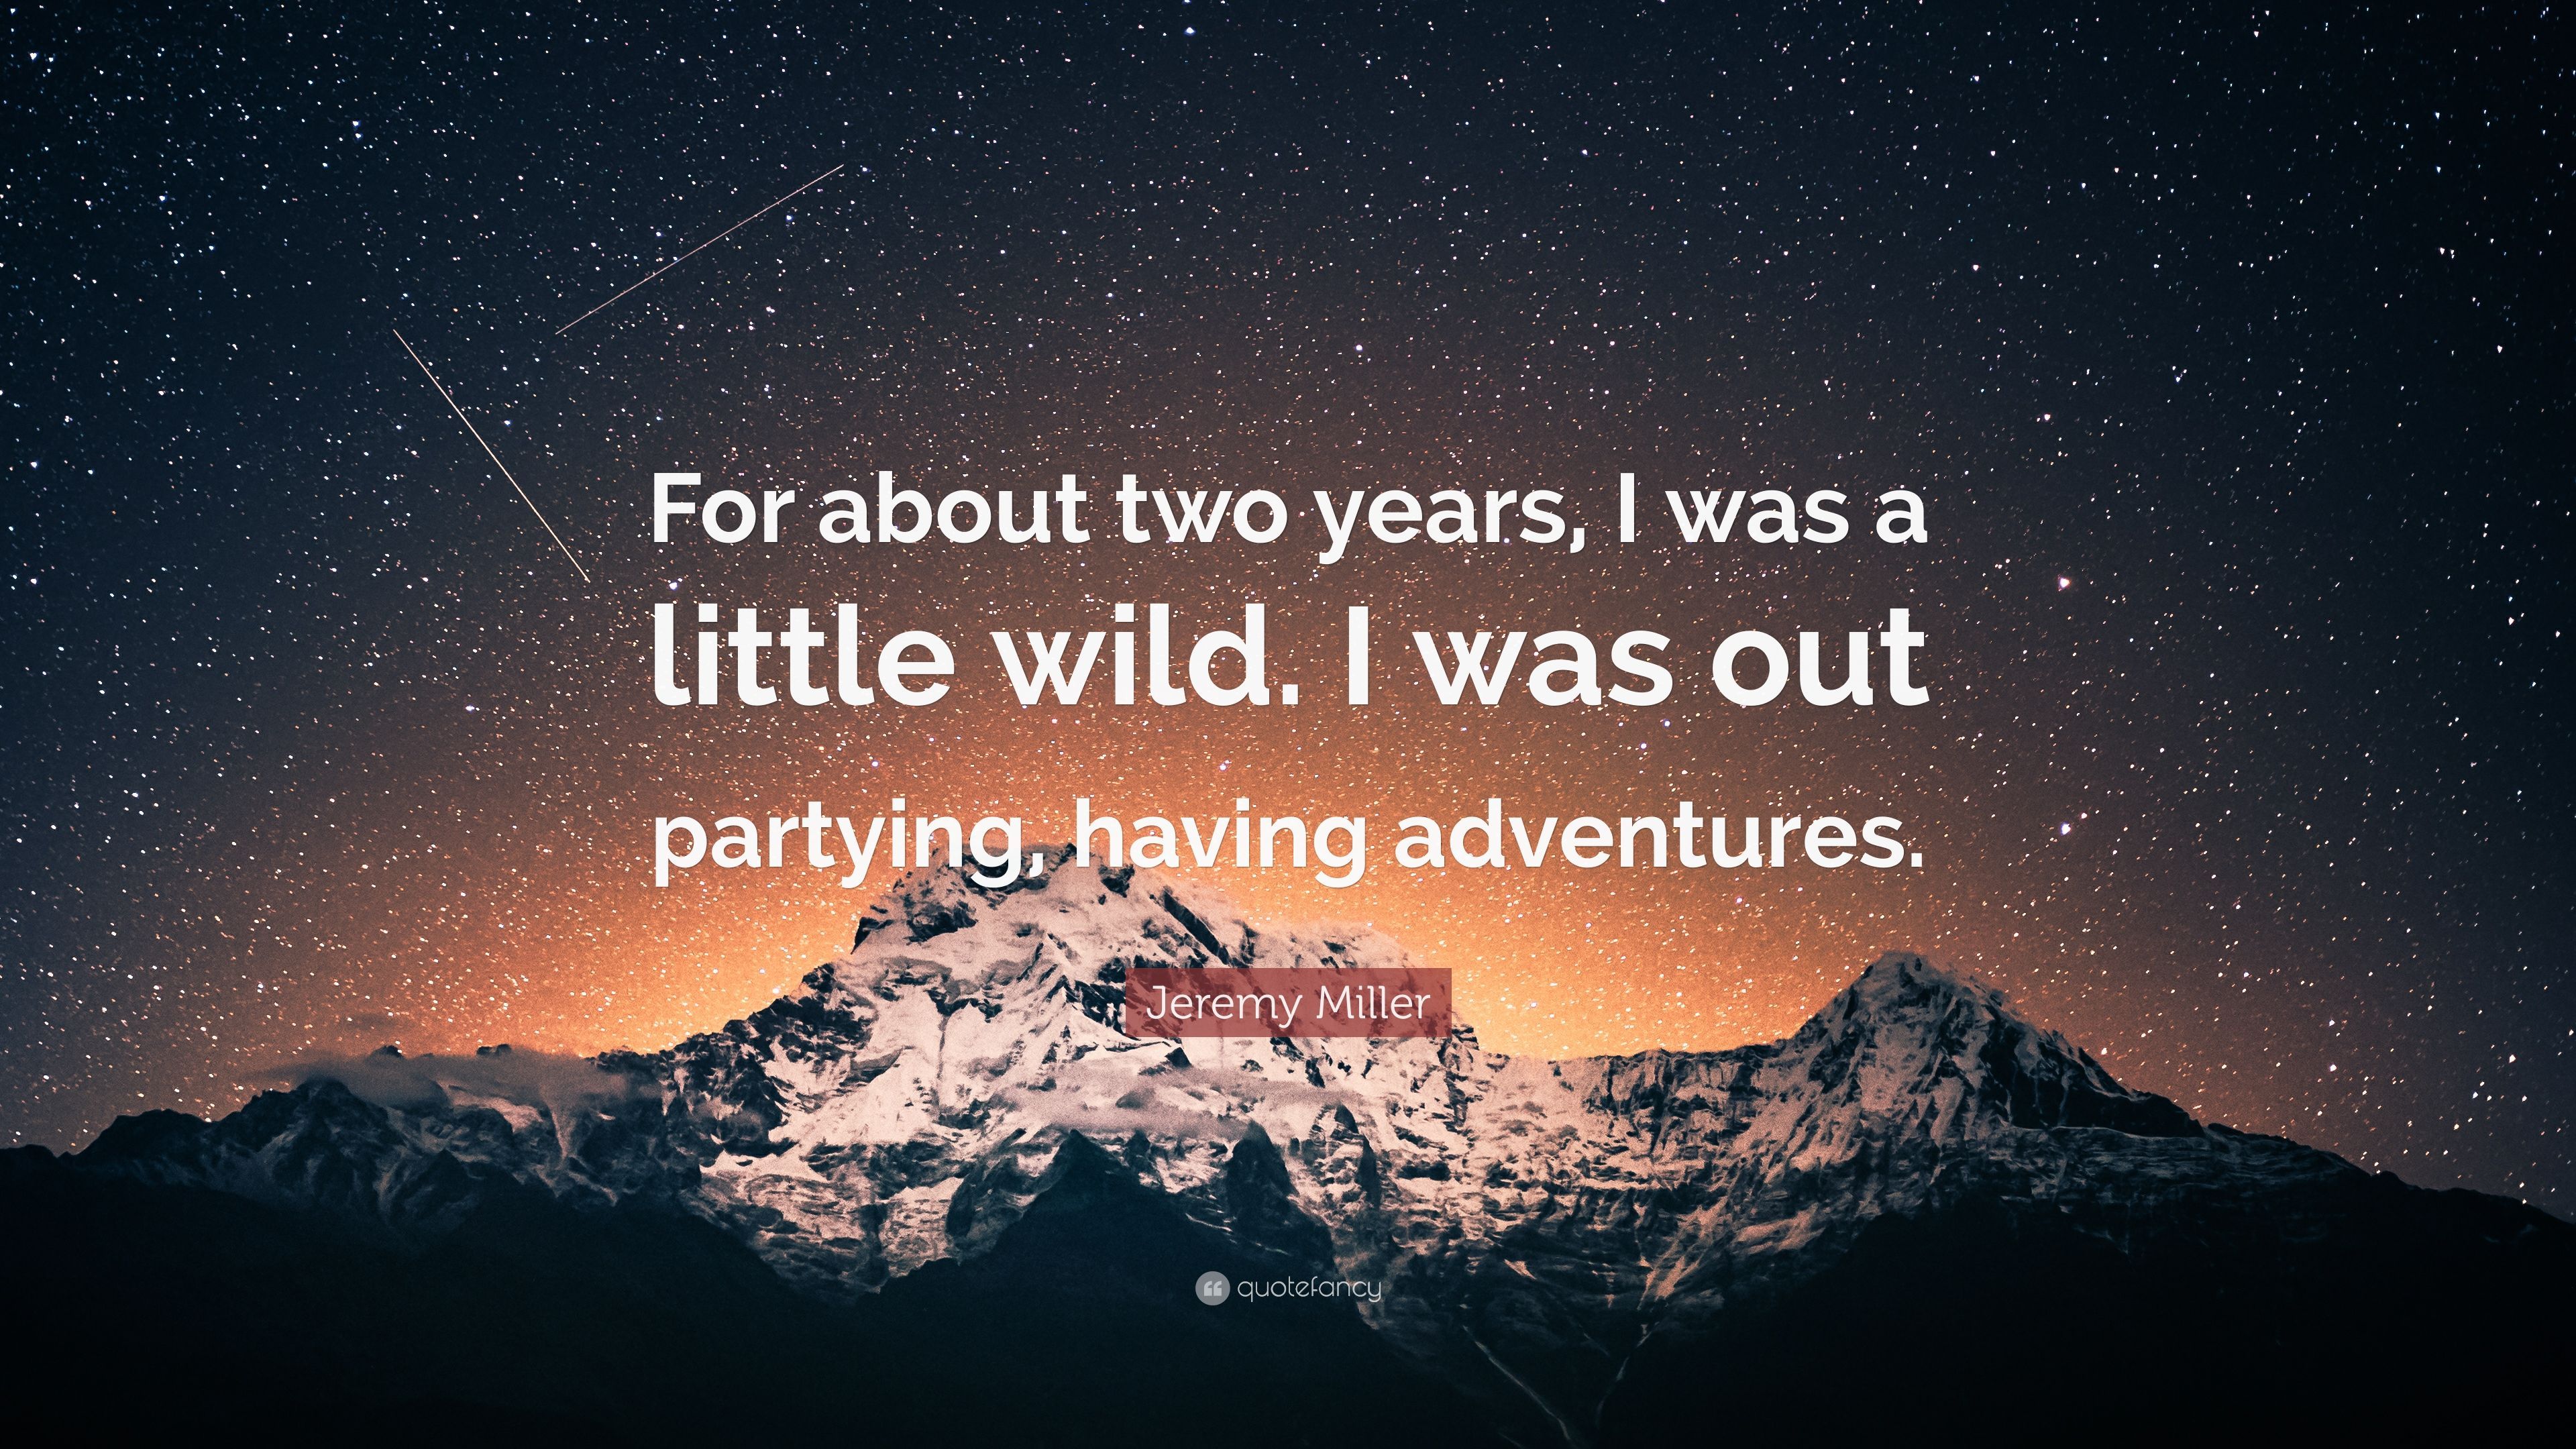 Jeremy Miller Quote: “For about two years, I was a little wild. I